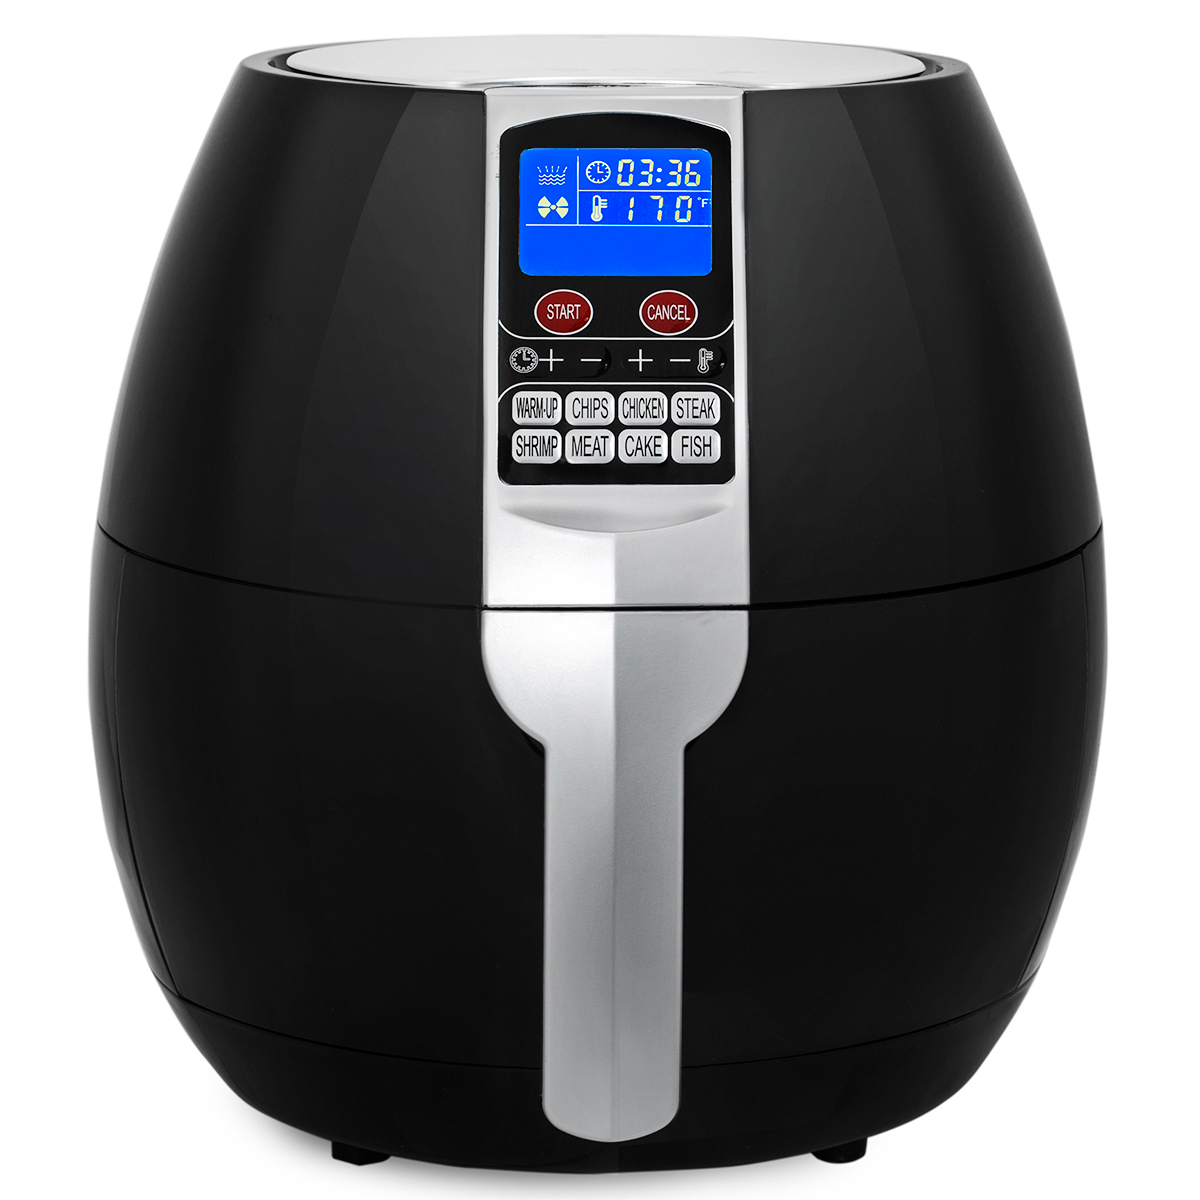 XtremepowerUS 3.7QT 1500W Electric Air Fryer Cooker 8 Cooking Menu Setting Digital Display, Black - image 2 of 4